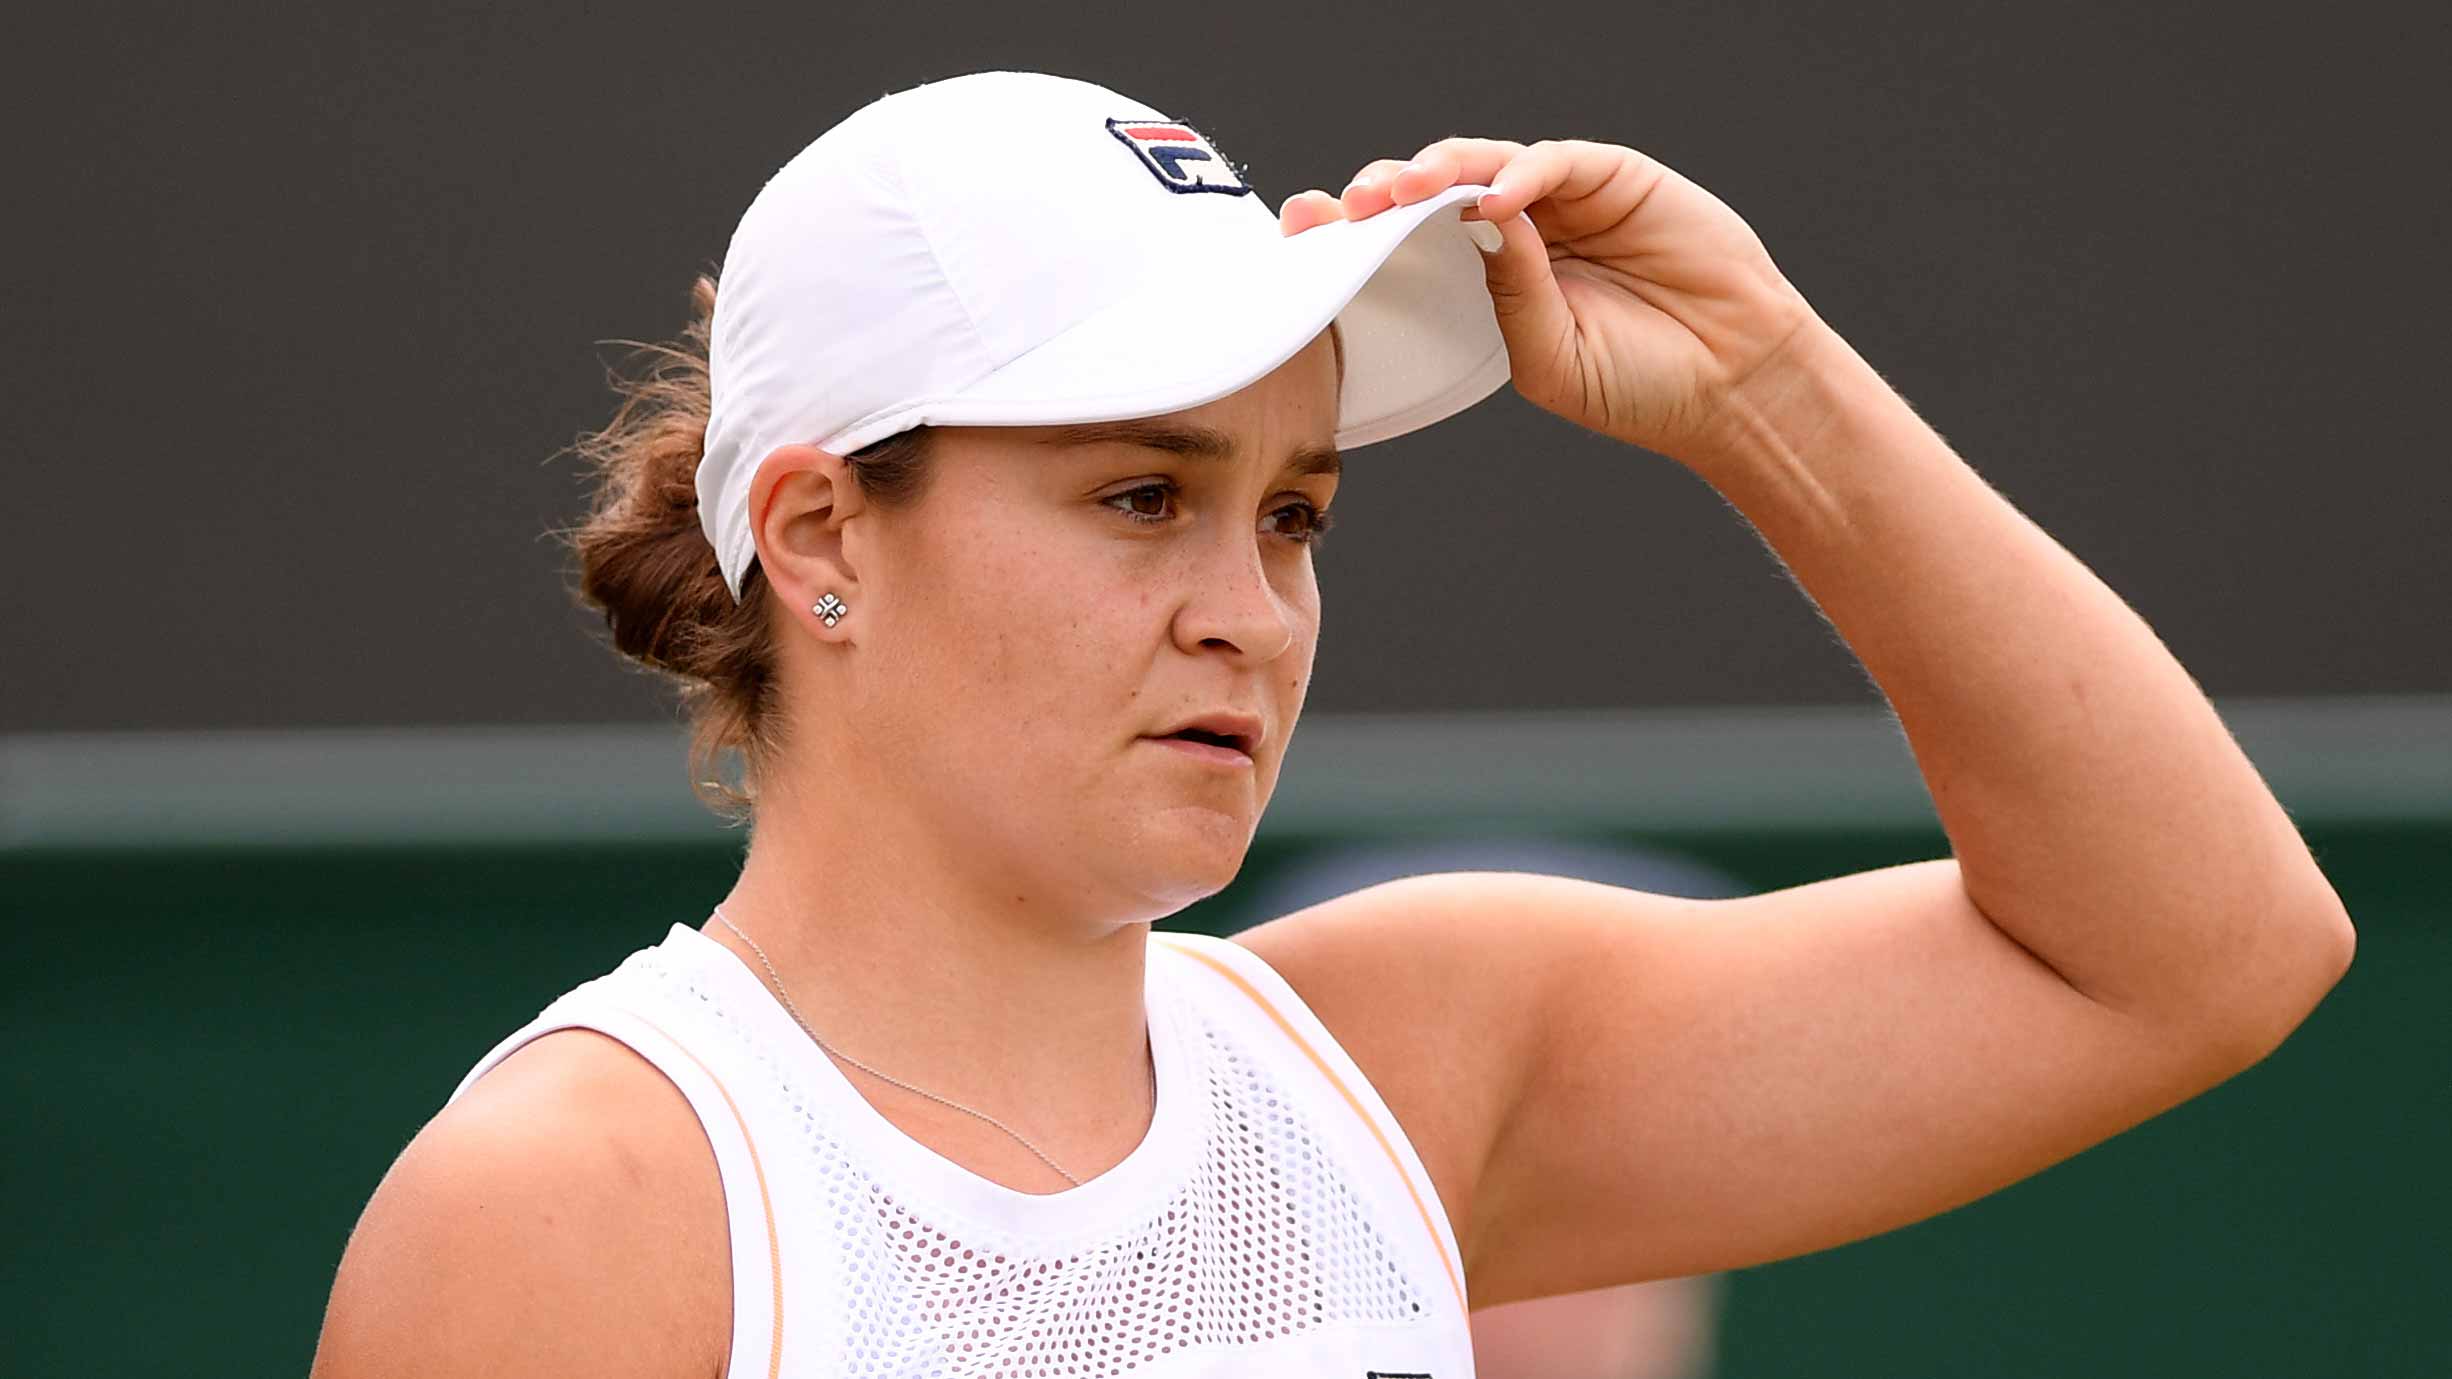 Shock exit: Ash Barty’s classy response as her Wimbledon dream is crushed 